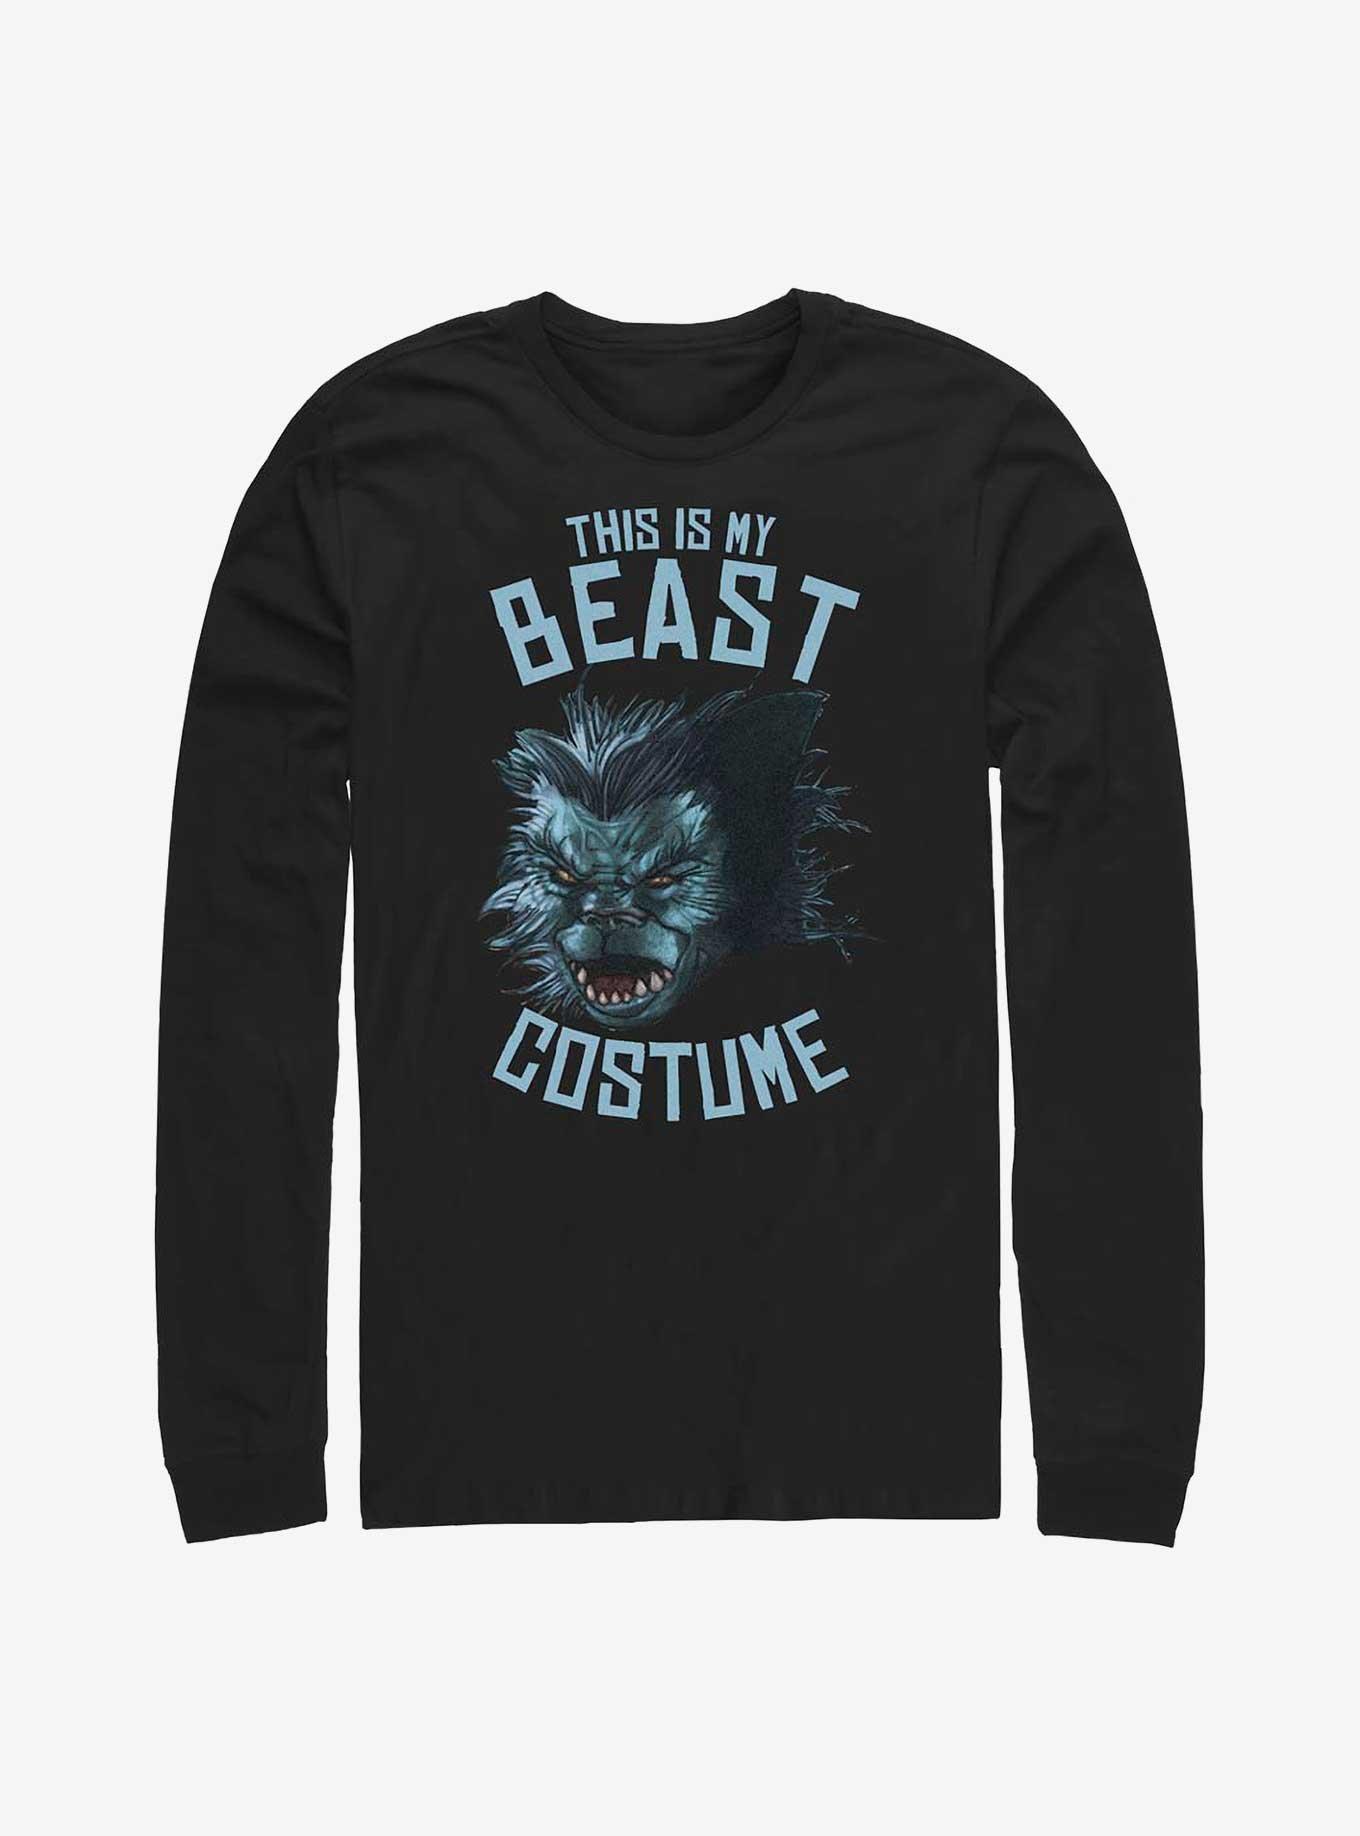 Marvel X-Men This Is My Beast Costume Long-Sleeve T-Shirt